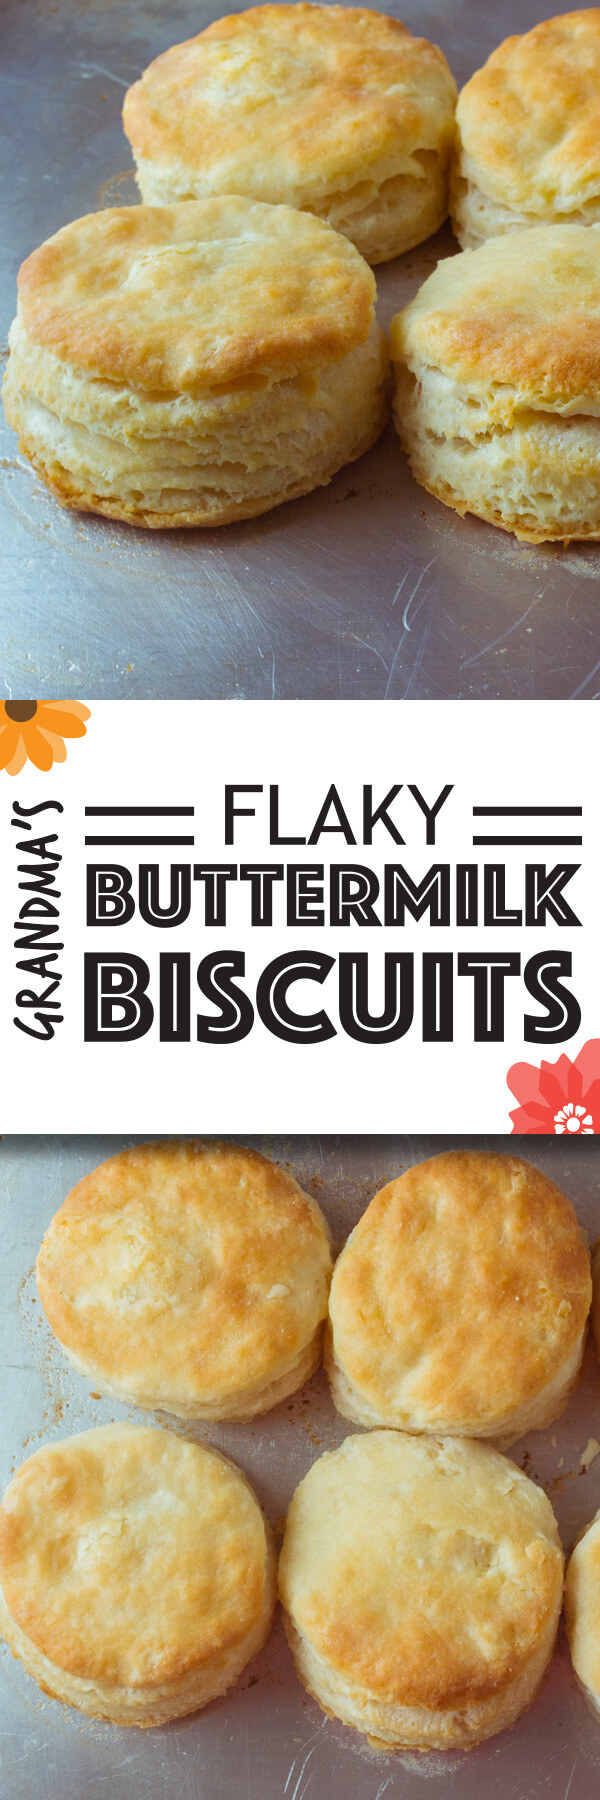 Grandma's flaky buttermilk biscuits. Gives this a try!